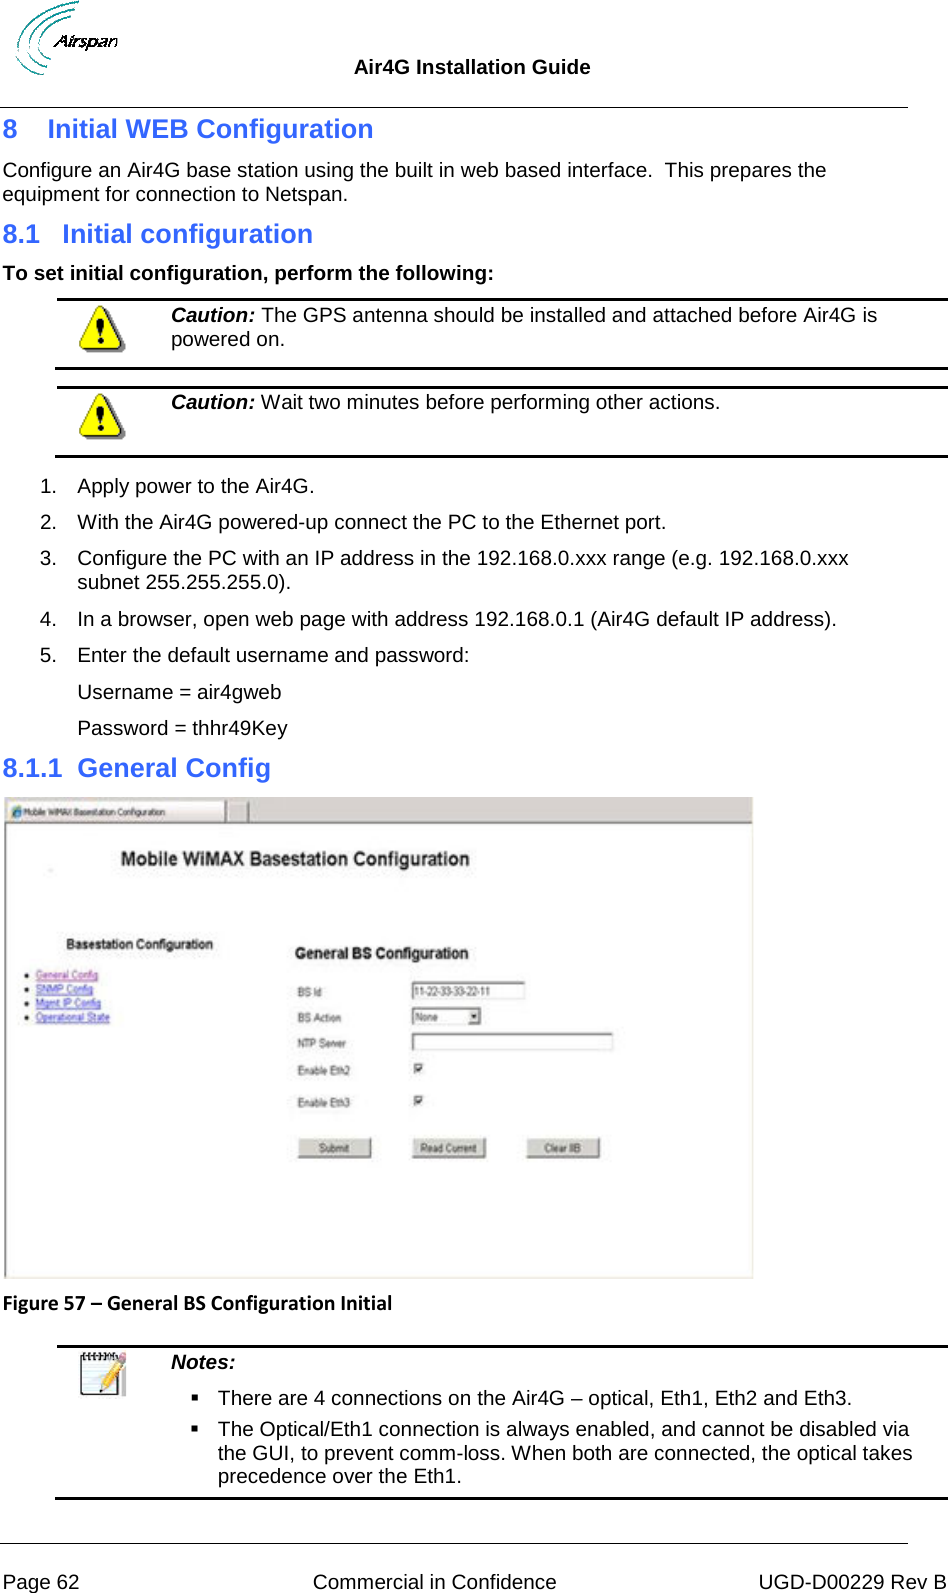  Air4G Installation Guide     Page 62 Commercial in Confidence UGD-D00229 Rev B 8  Initial WEB Configuration Configure an Air4G base station using the built in web based interface.  This prepares the equipment for connection to Netspan. 8.1  Initial configuration To set initial configuration, perform the following:  Caution: The GPS antenna should be installed and attached before Air4G is powered on.   Caution: Wait two minutes before performing other actions.  1. Apply power to the Air4G. 2. With the Air4G powered-up connect the PC to the Ethernet port. 3. Configure the PC with an IP address in the 192.168.0.xxx range (e.g. 192.168.0.xxx subnet 255.255.255.0). 4. In a browser, open web page with address 192.168.0.1 (Air4G default IP address). 5. Enter the default username and password: Username = air4gweb Password = thhr49Key 8.1.1  General Config  Figure 57 – General BS Configuration Initial    Notes:   There are 4 connections on the Air4G – optical, Eth1, Eth2 and Eth3.  The Optical/Eth1 connection is always enabled, and cannot be disabled via the GUI, to prevent comm-loss. When both are connected, the optical takes precedence over the Eth1.  